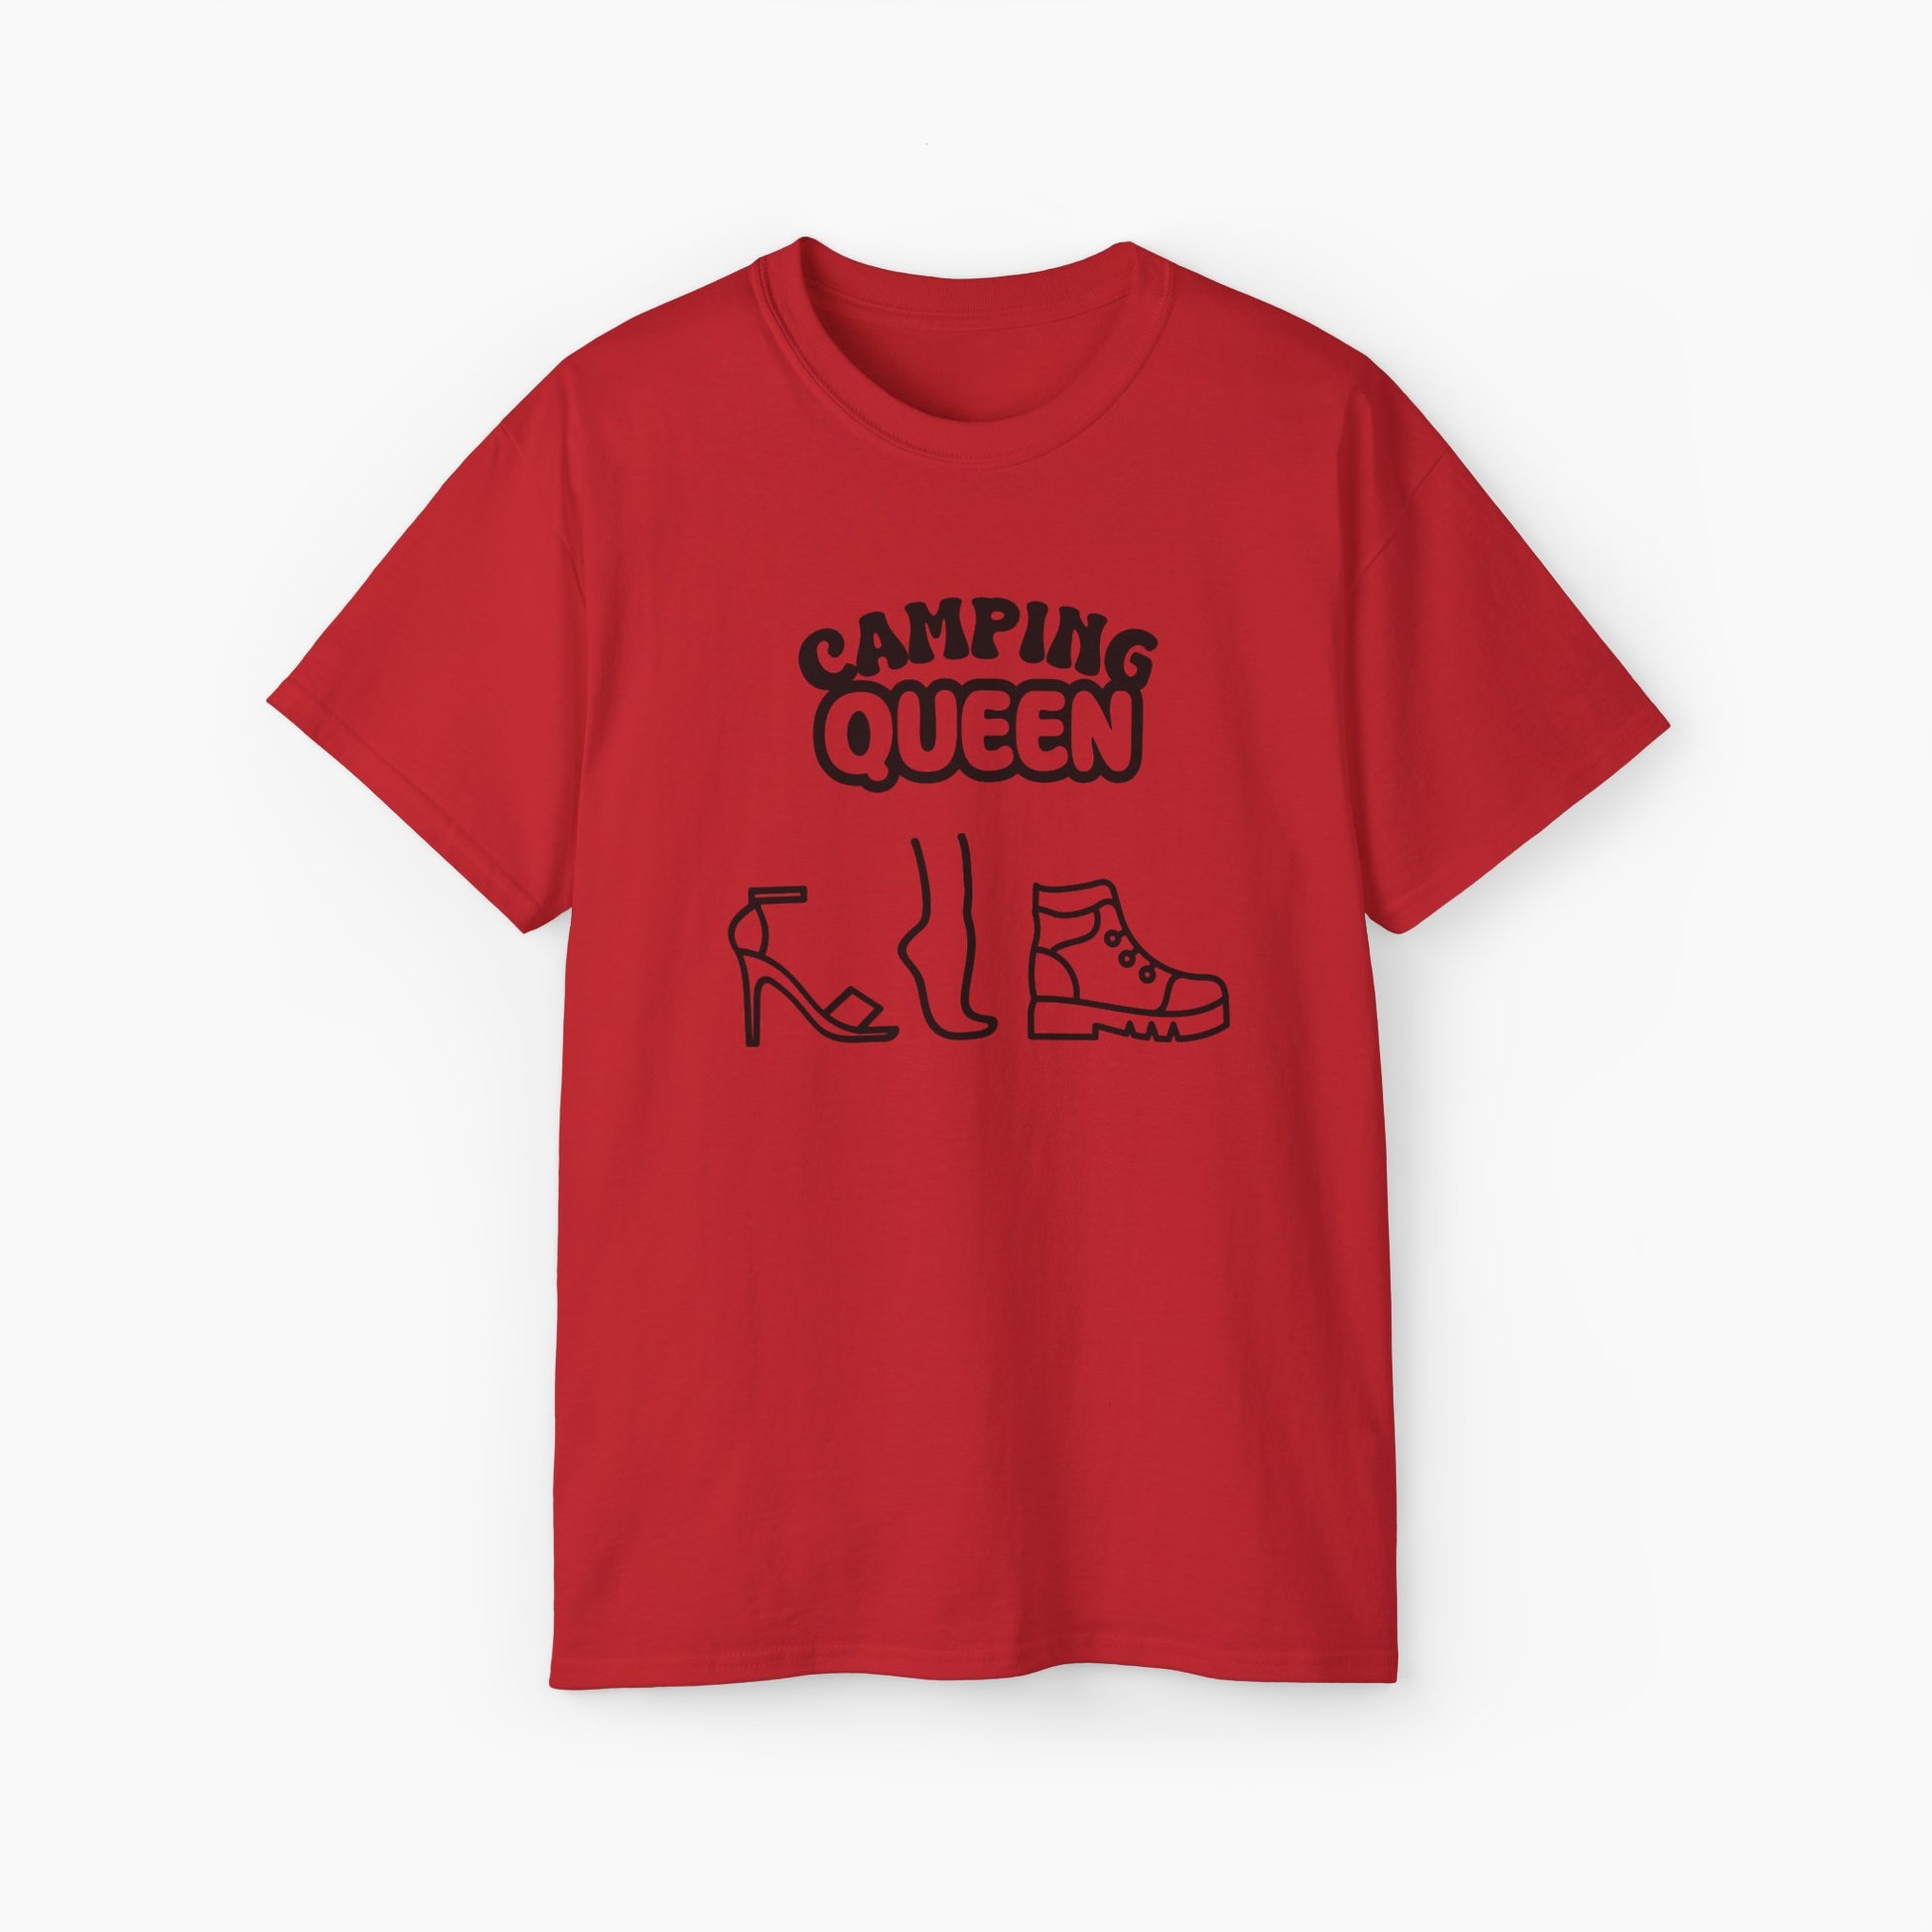 Red t-shirt with 'Camping Queen' text, illustrated with a high heel, a foot, and a boot, on a plain background.